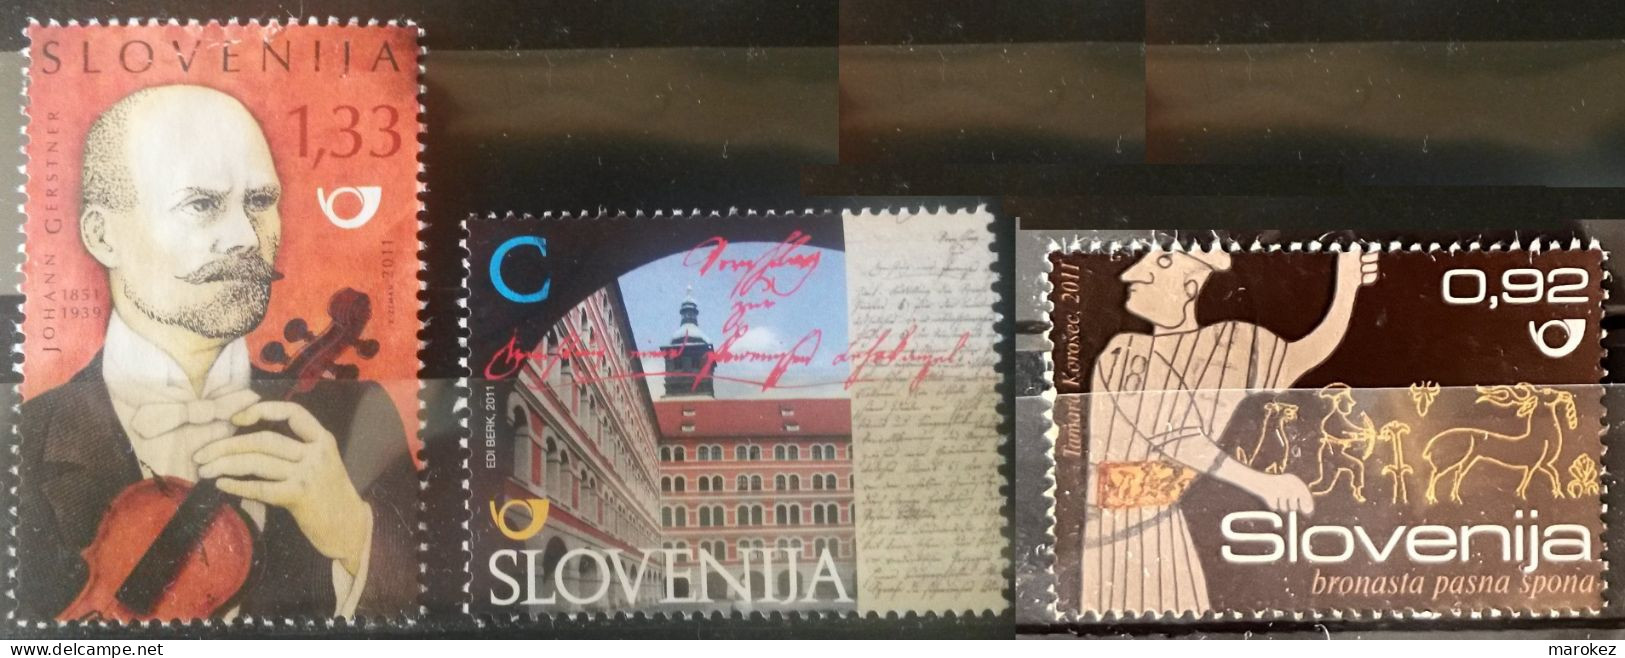 SLOVENIA 2011 Music, History & Archaeology 3 Postally Used Stamps MICHEL # 902,912,925 - Eslovenia